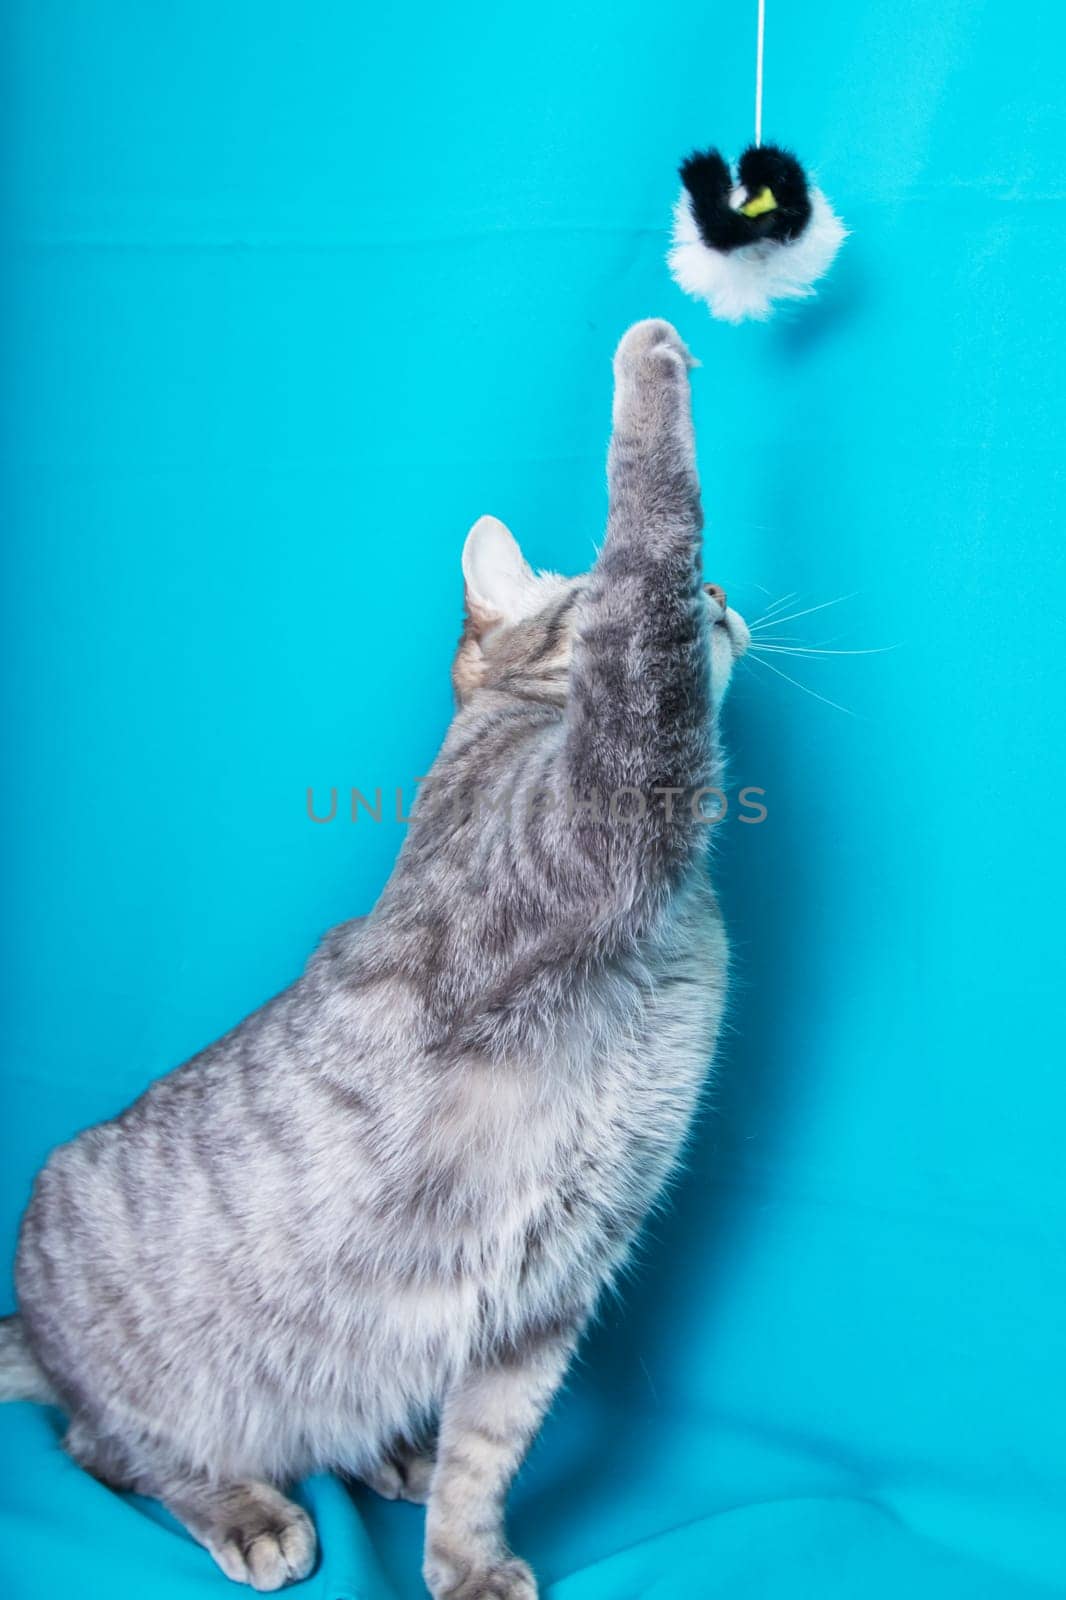 Gray cat with yellow eyes portrait on blue background close up